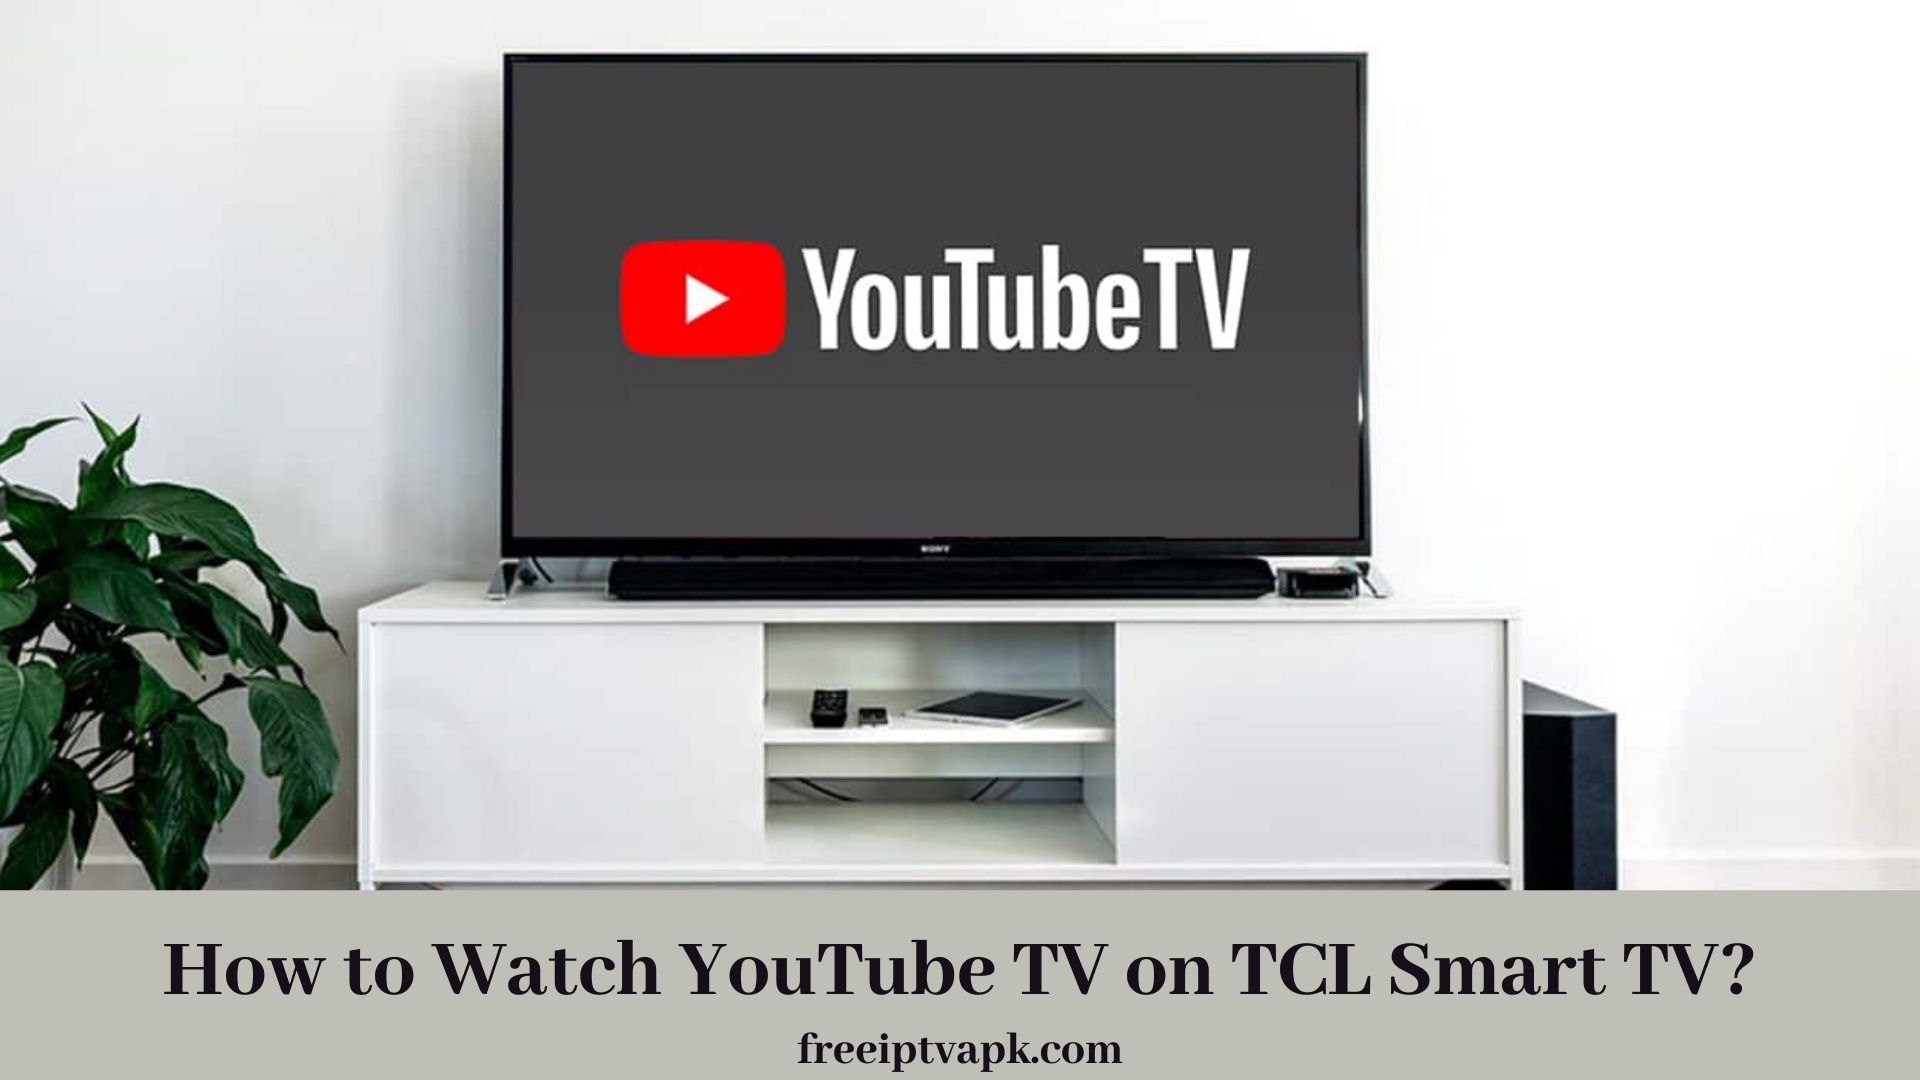 How to Watch YouTube TV on TCL Smart TV?